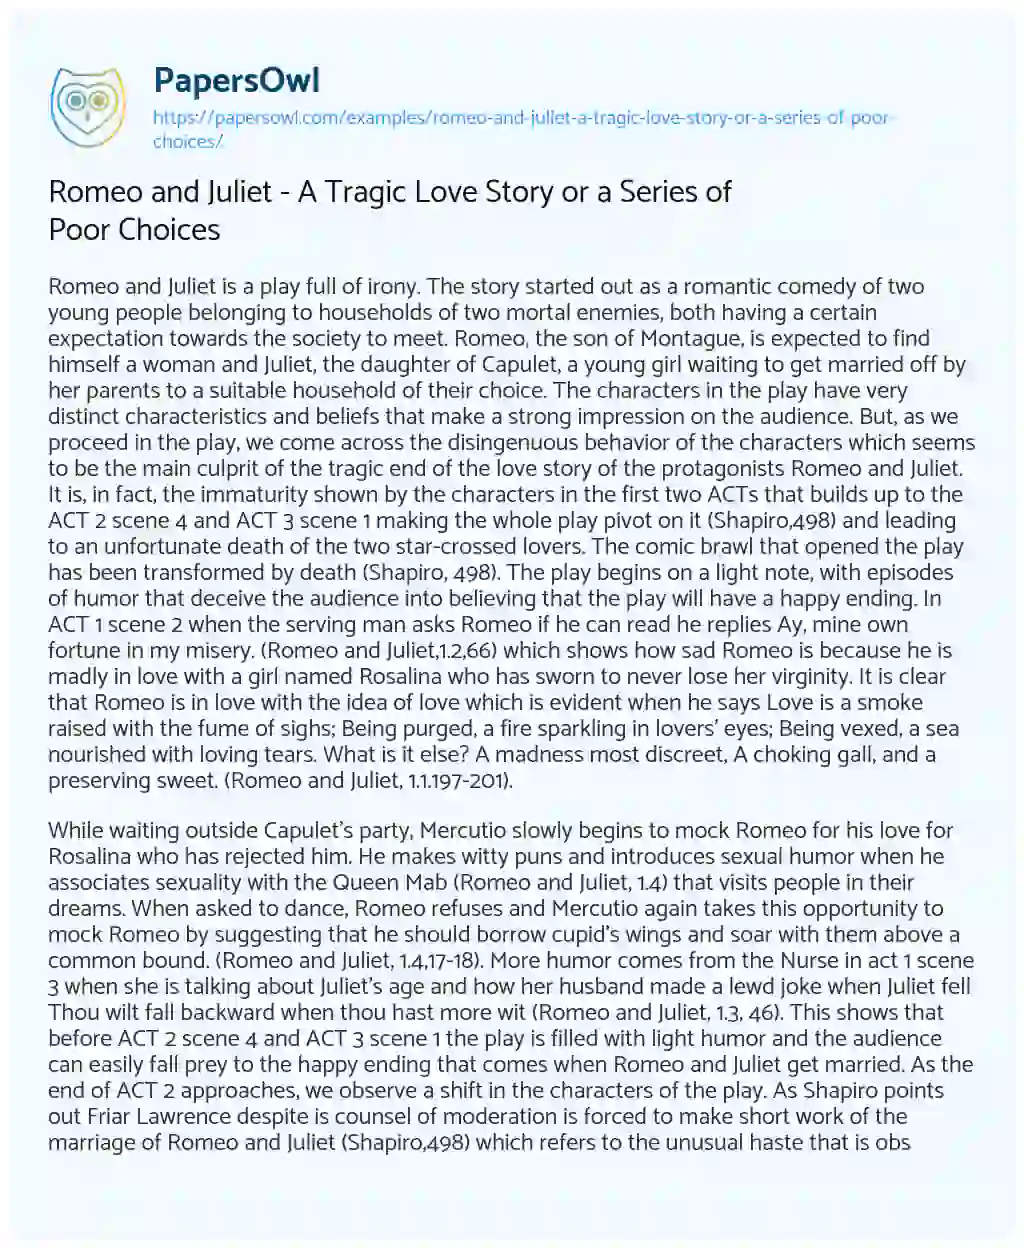 Essay on Romeo and Juliet – a Tragic Love Story or a Series of Poor Choices